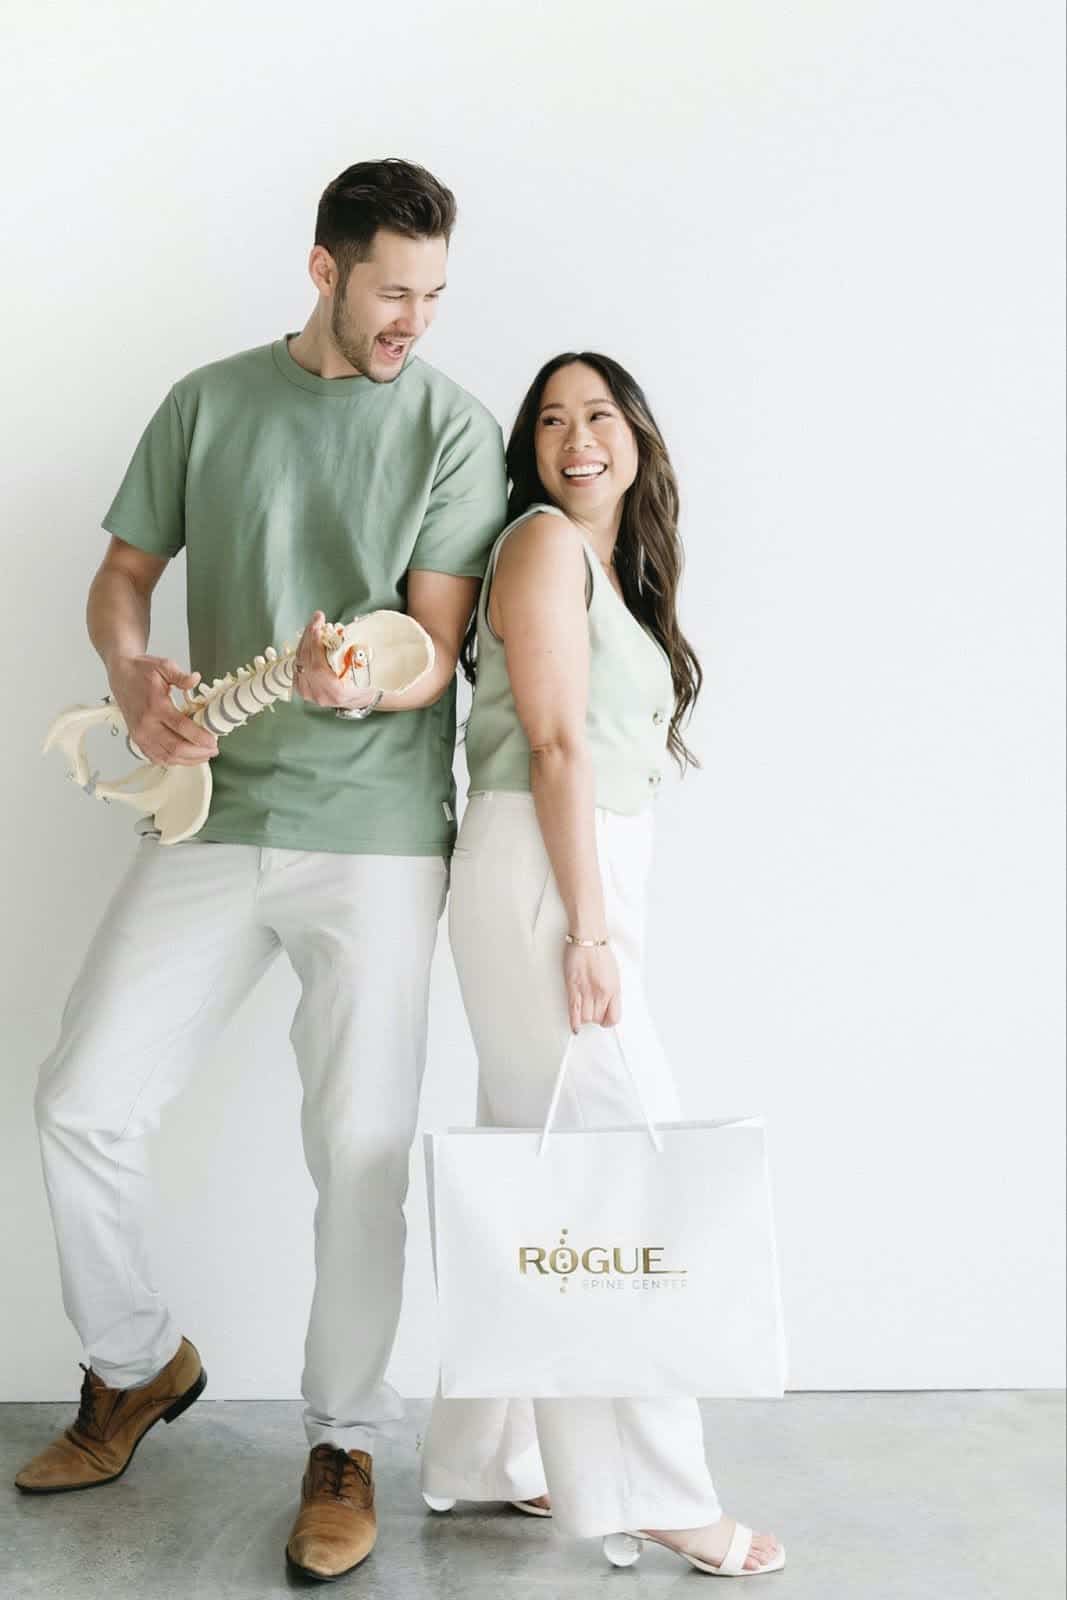 Rogue Chiropractic- Discover a World of Enhanced Well-being